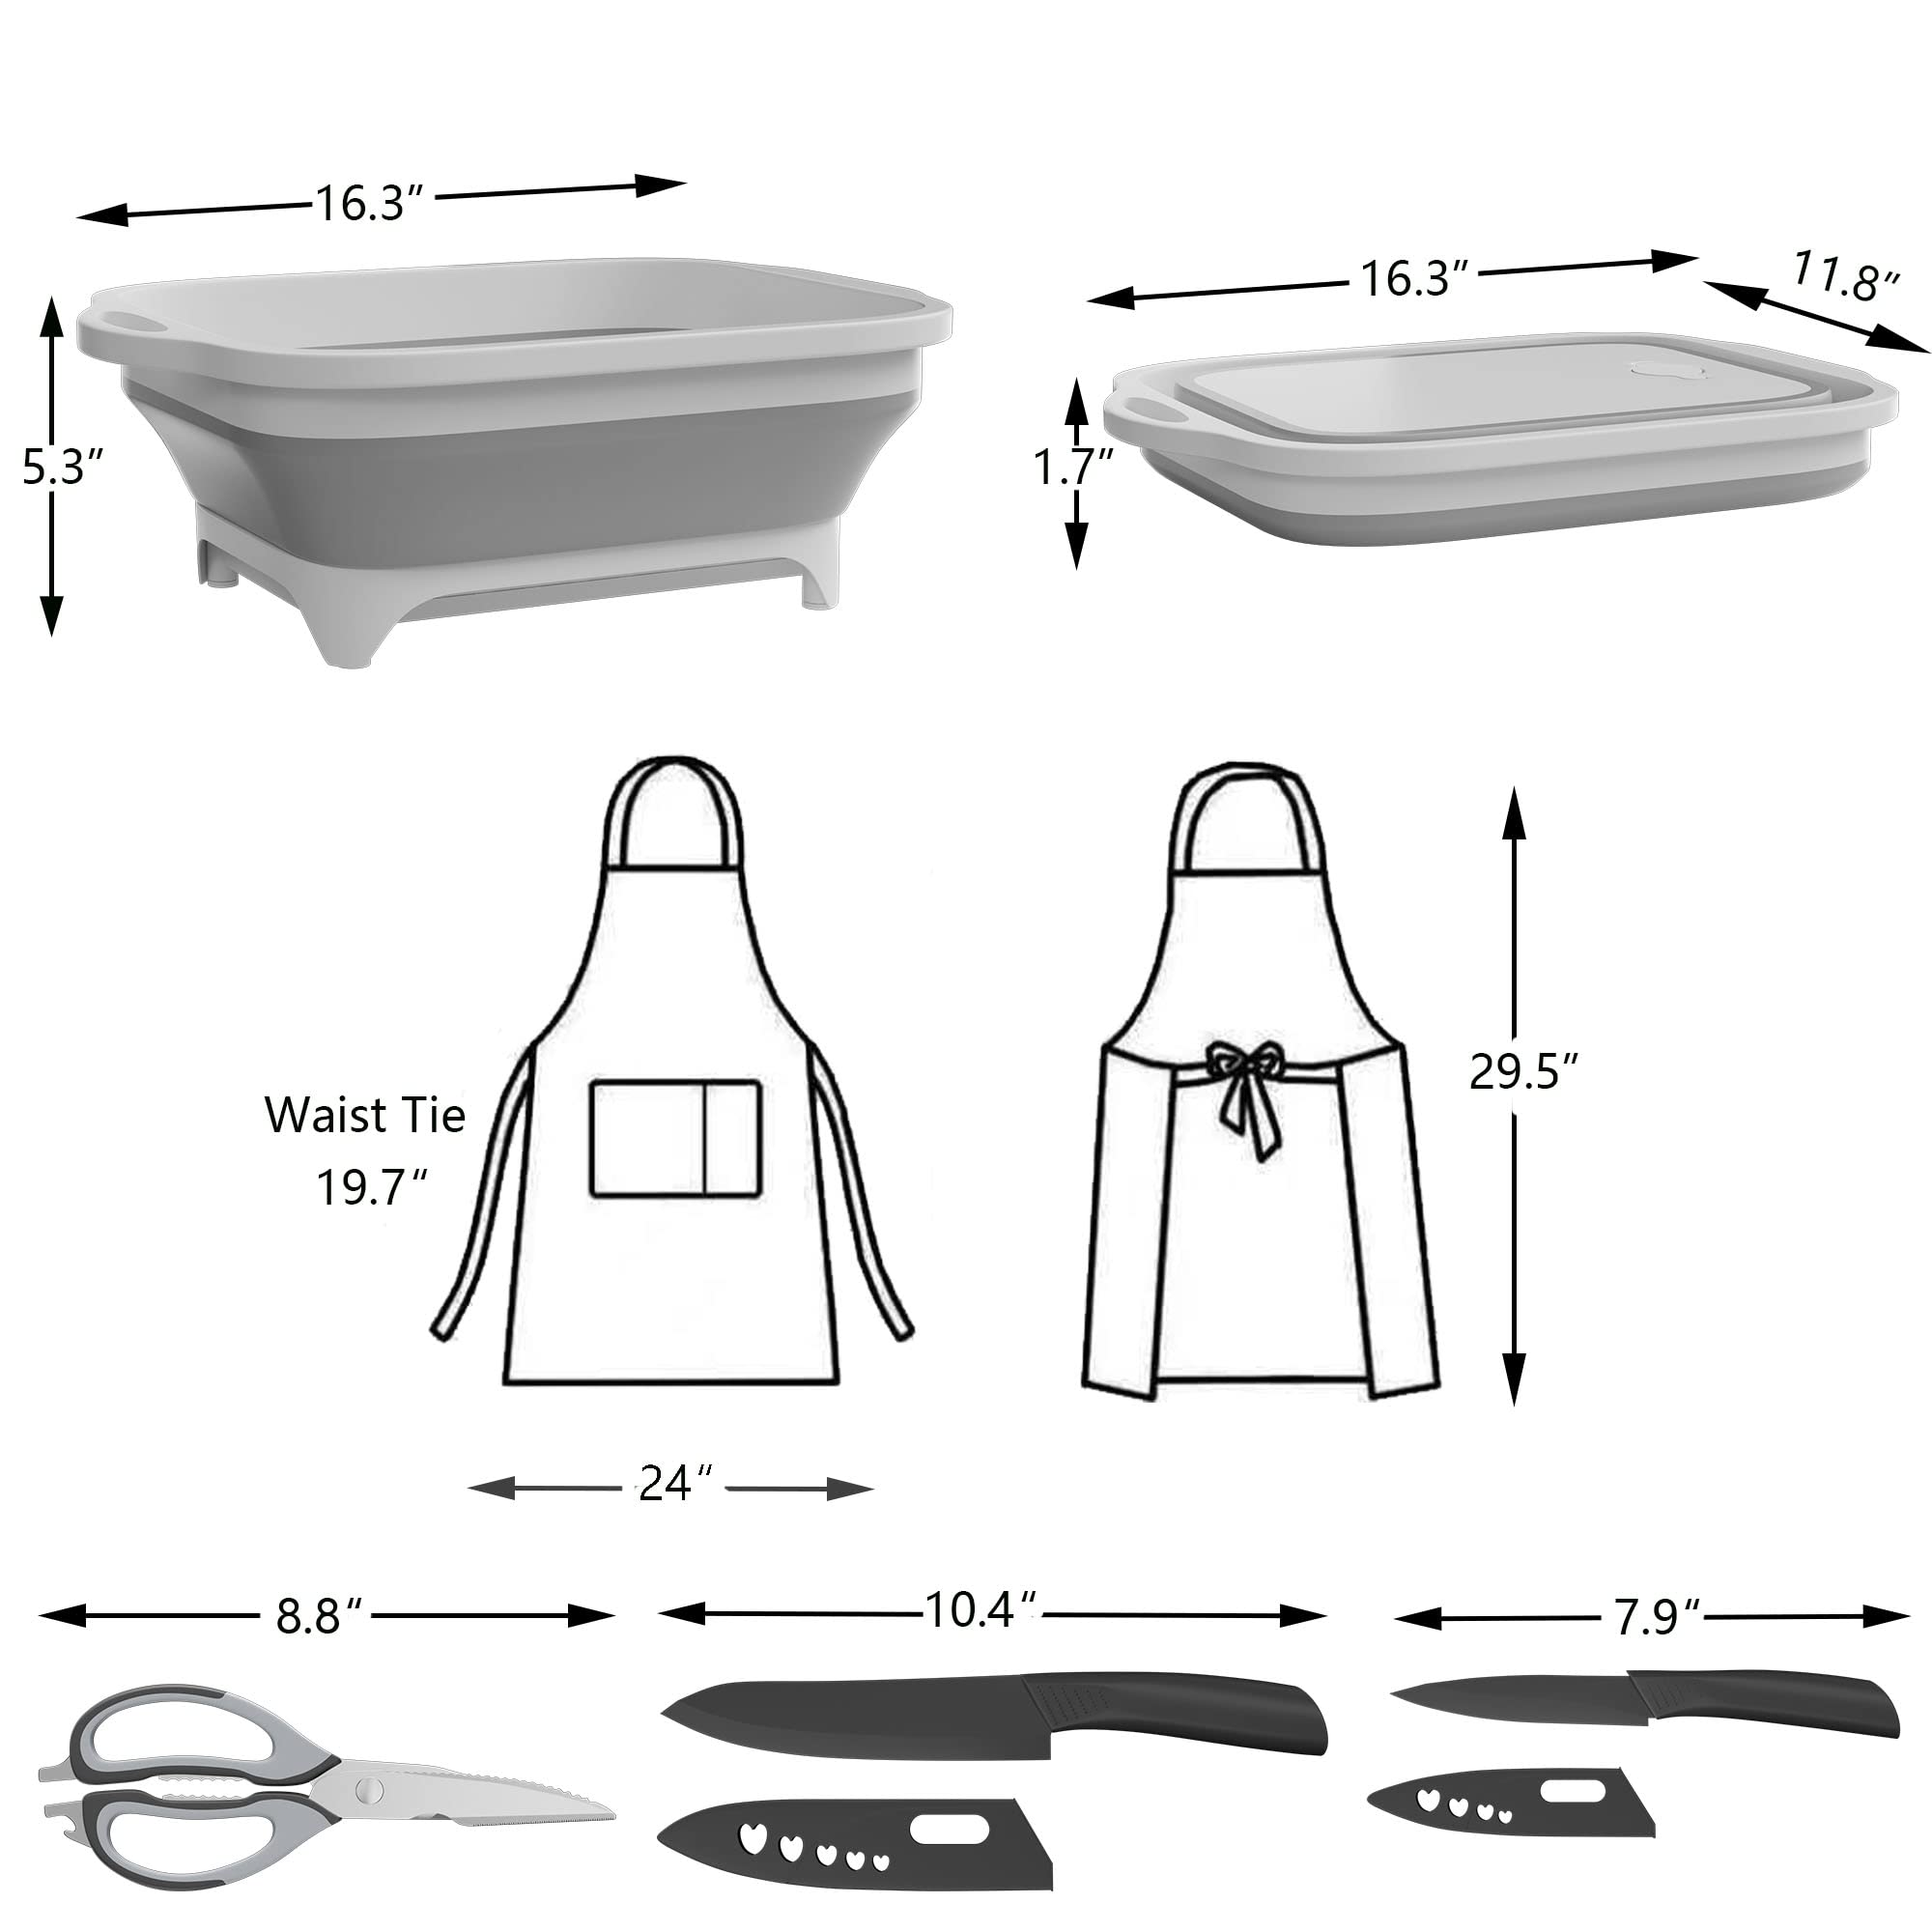 Camping Accessories Kit, Collapsible Cutting Board,Chef Fruit Knife Set,Shears with Magnet Holder,2 Pack Aprons Black and White with 2 Pockets,Kitchen Utensil Gadgets,Wash Basin Sink,Colander Strainer